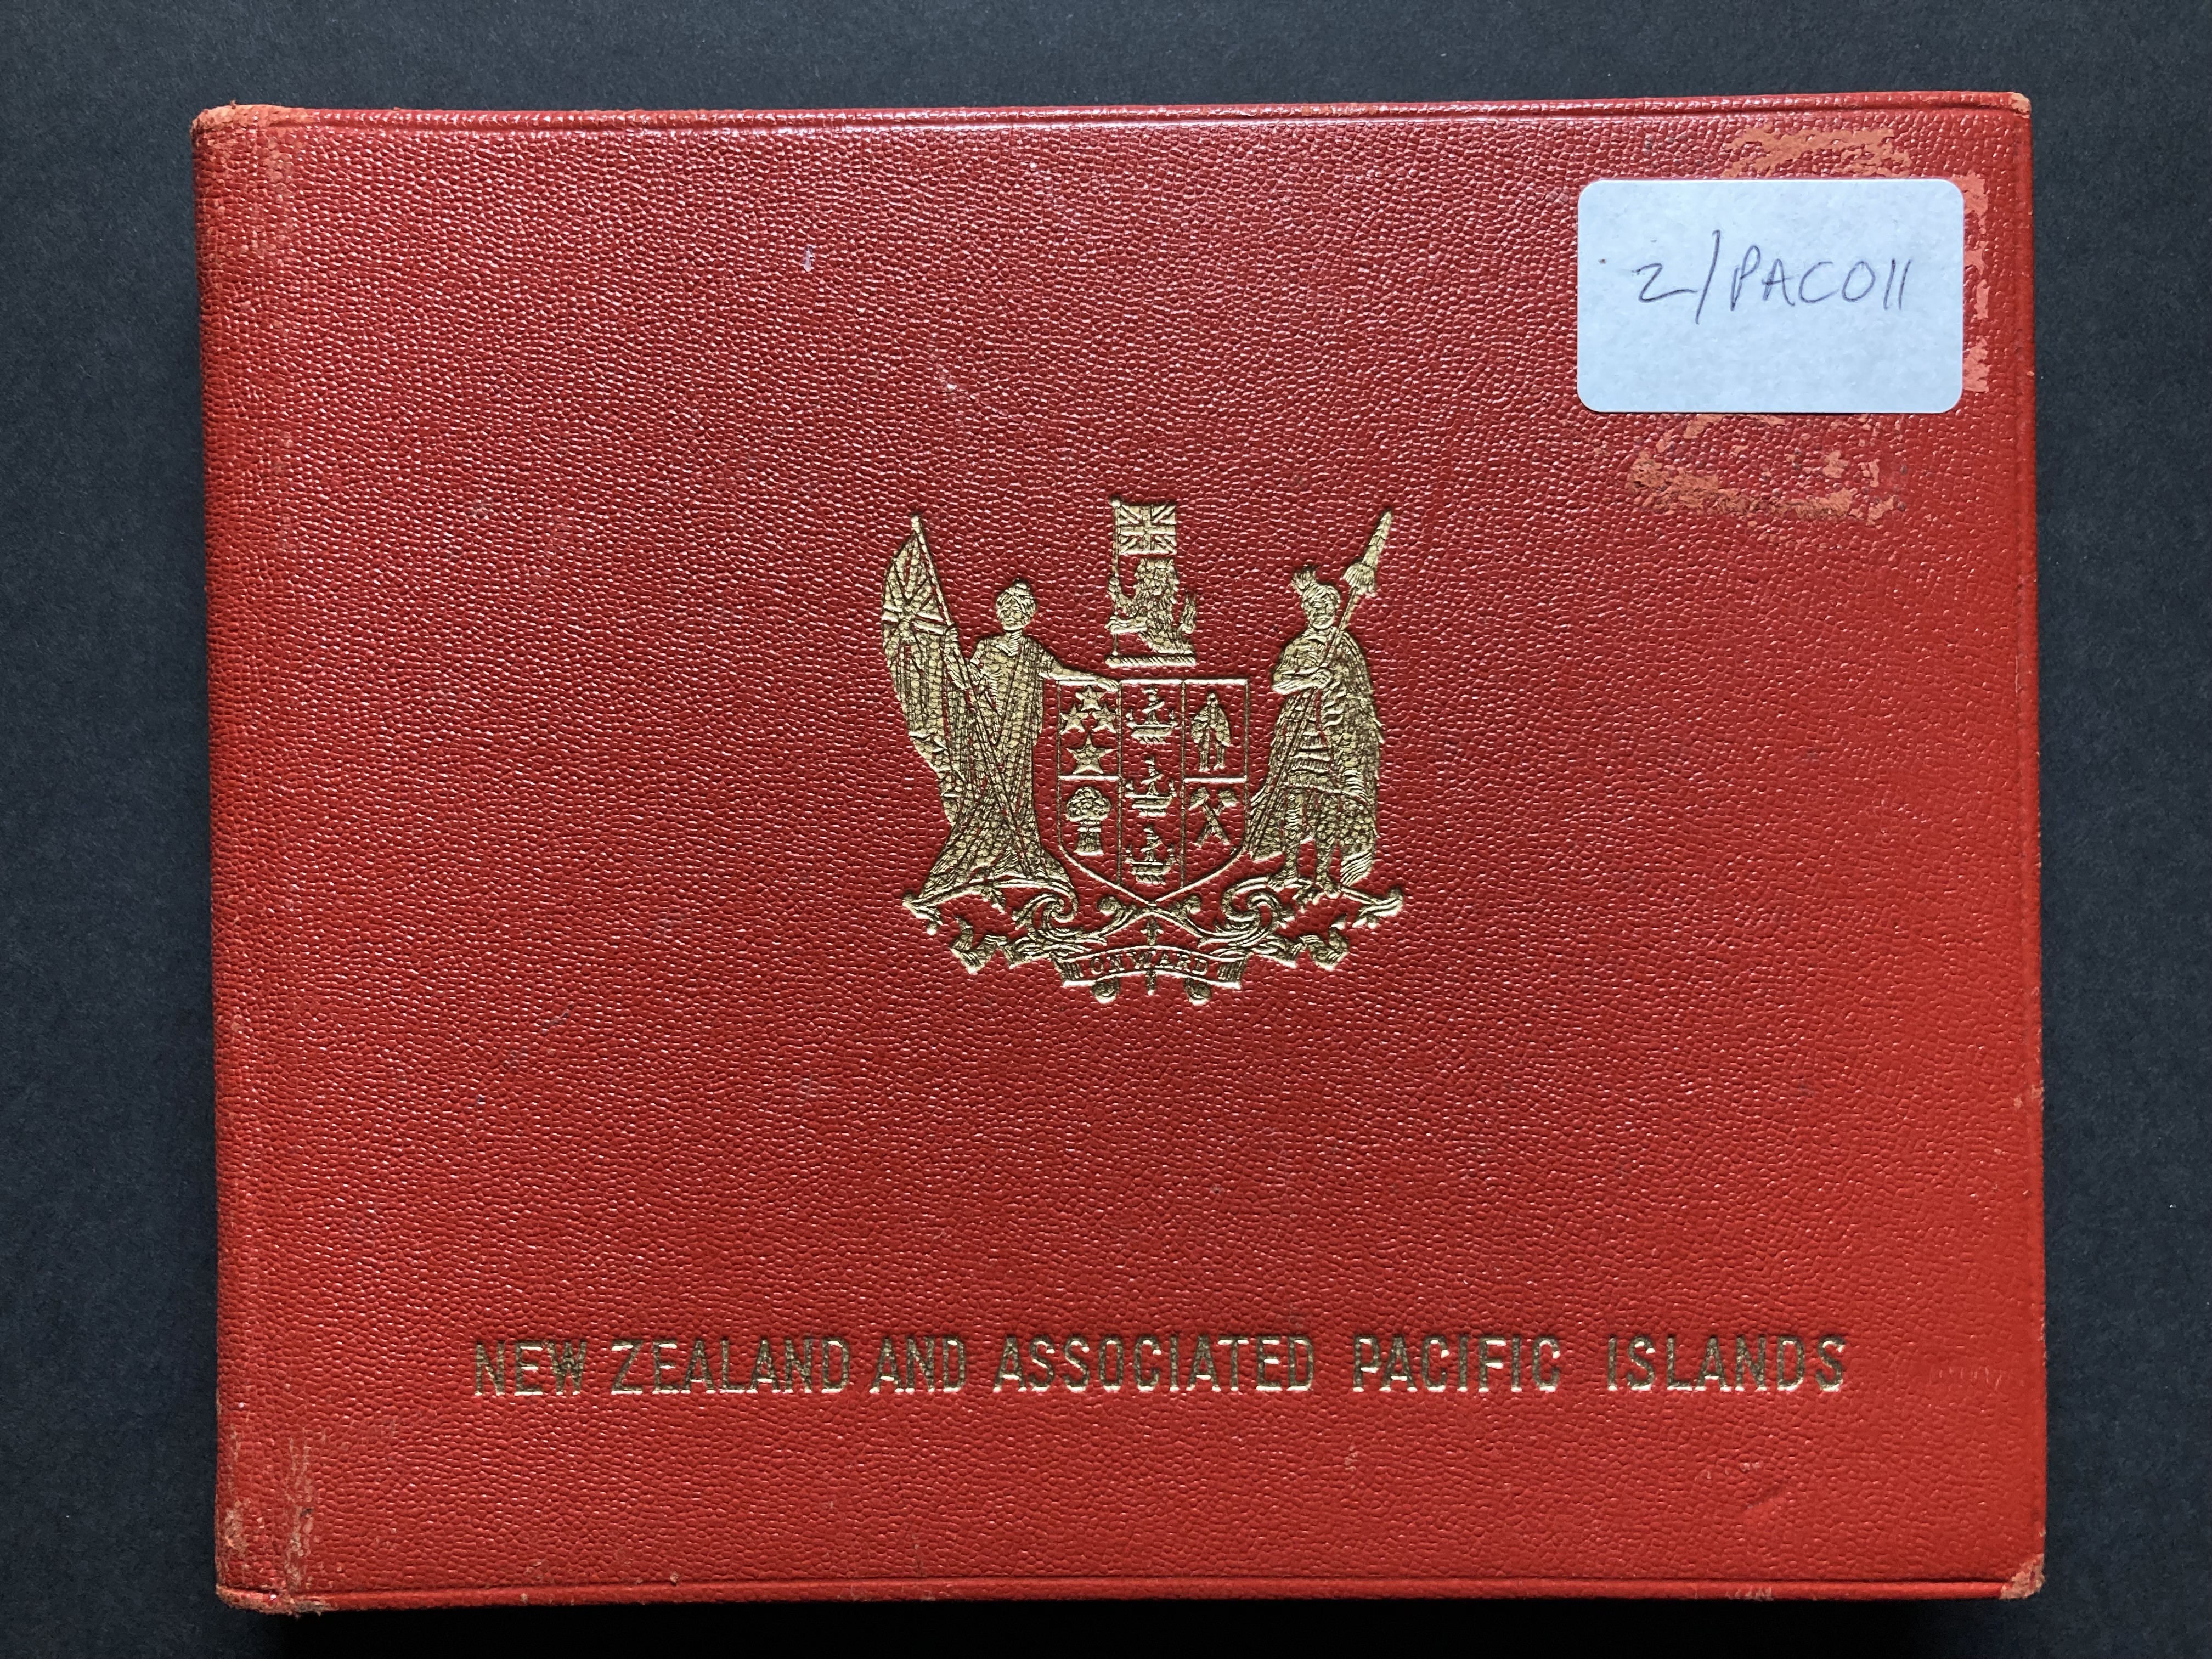 New Zealand stamps: Small stock book of mint and used on 10 pages of NZ & associated Pacific Islands